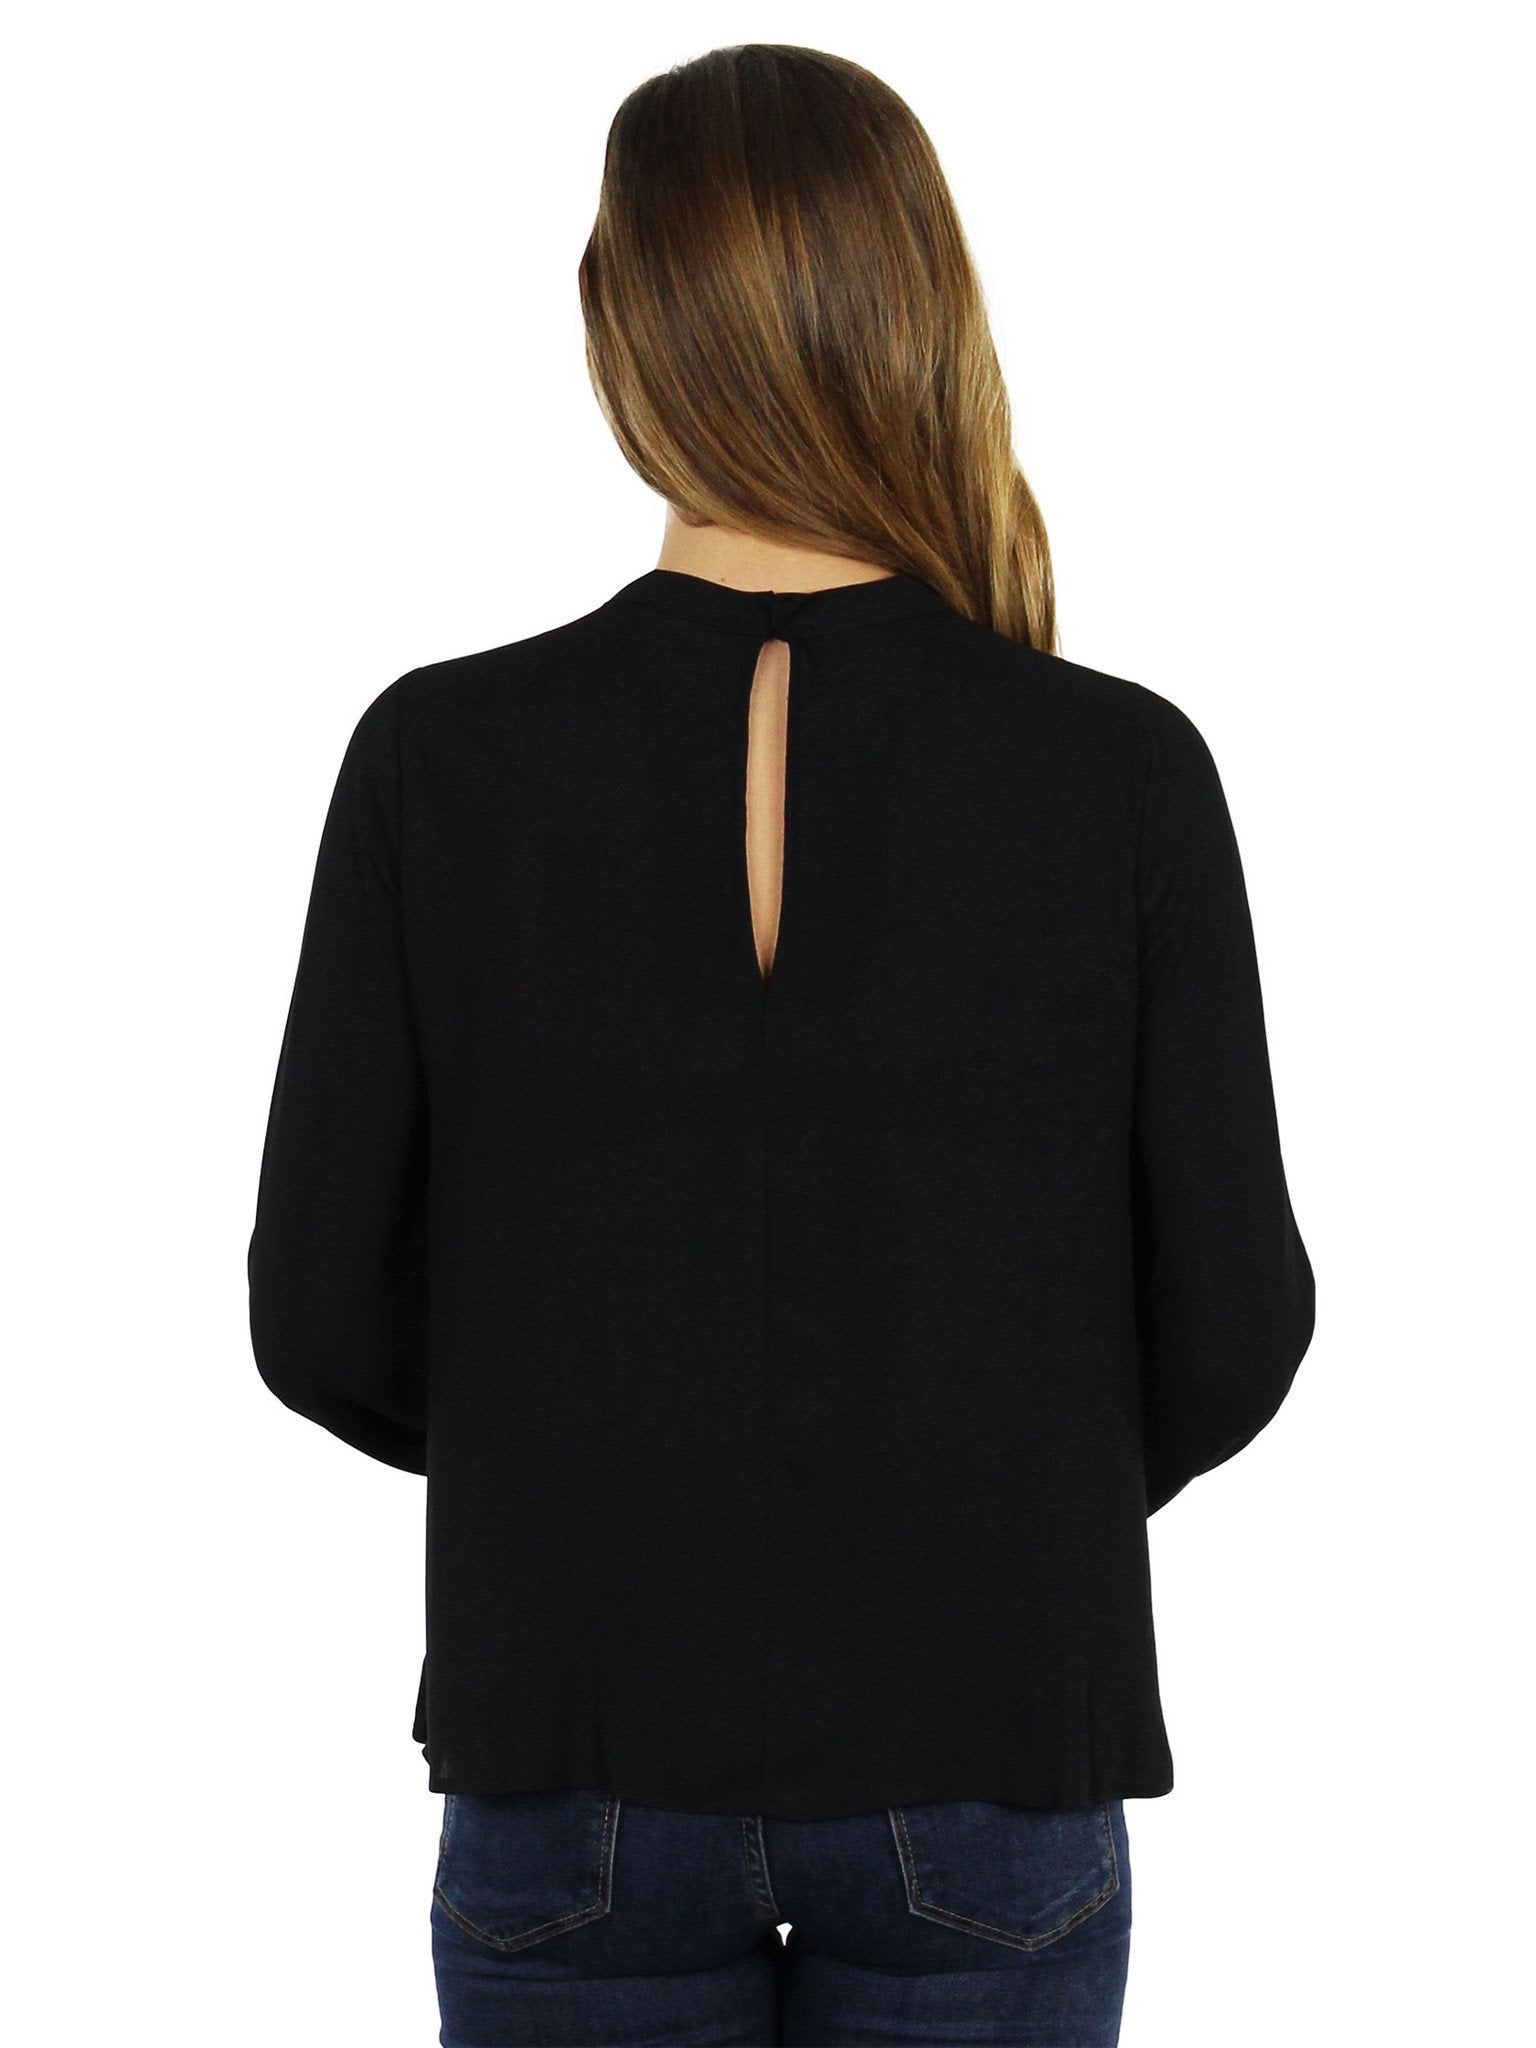 Women wearing a top rental from Lush called Cut Out Long Sleeve Blouse